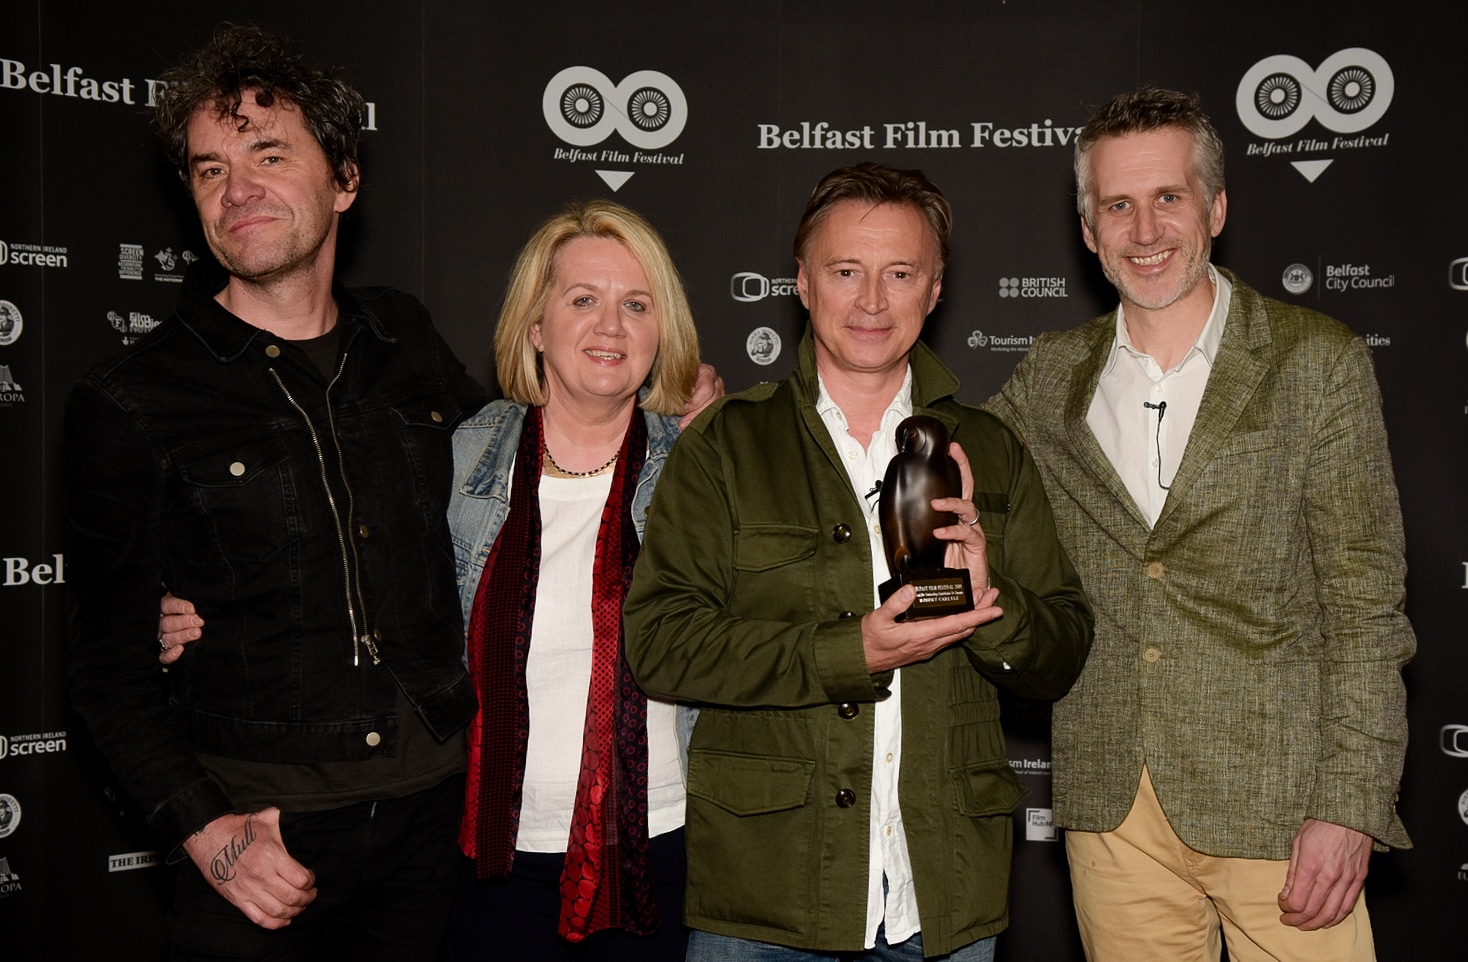 Day Two: Robert Carlyle Receives The Bfi Award For Outstanding Contribution To Cinema